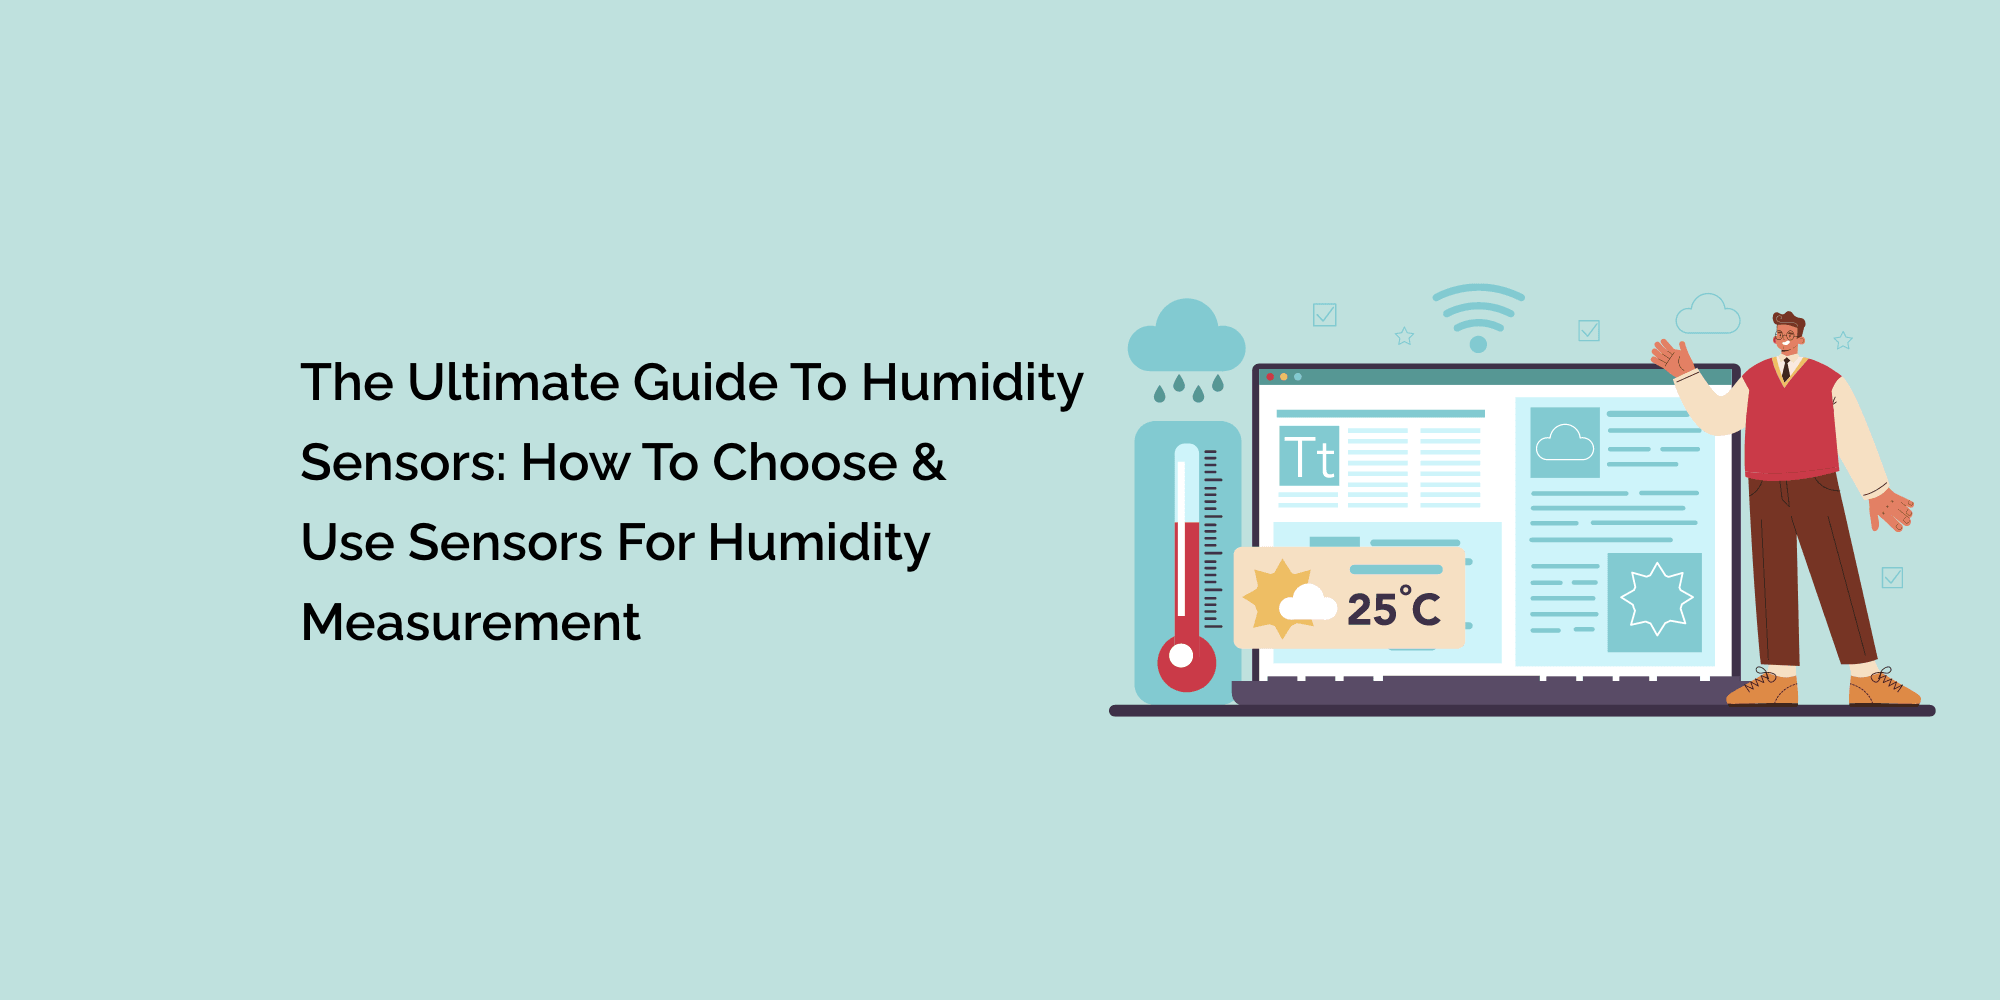 http://tempcube.io/cdn/shop/articles/The_Ultimate_Guide_to_Humidity_Sensors.png?v=1684310688